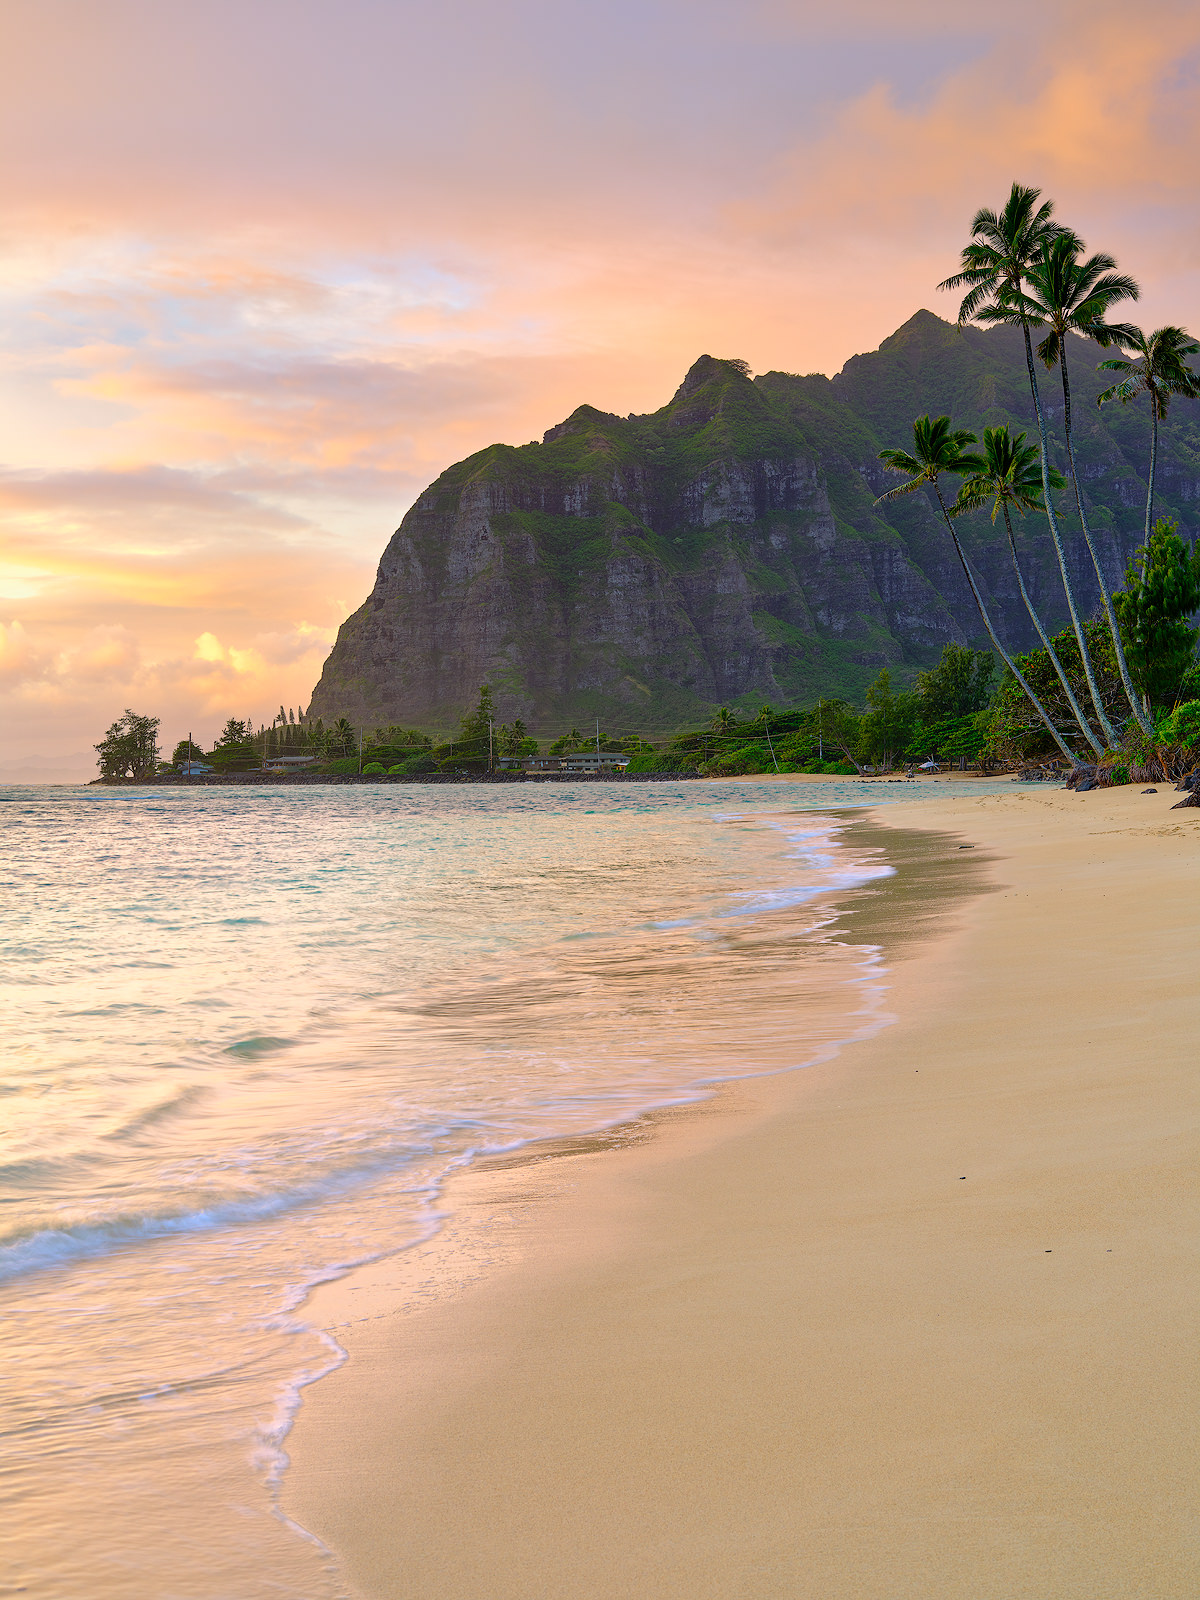 The beauty of the north shore on the island of Oahu speaks for itself.  At sunrise, this amazing scene at Kaaawa Beach had the...